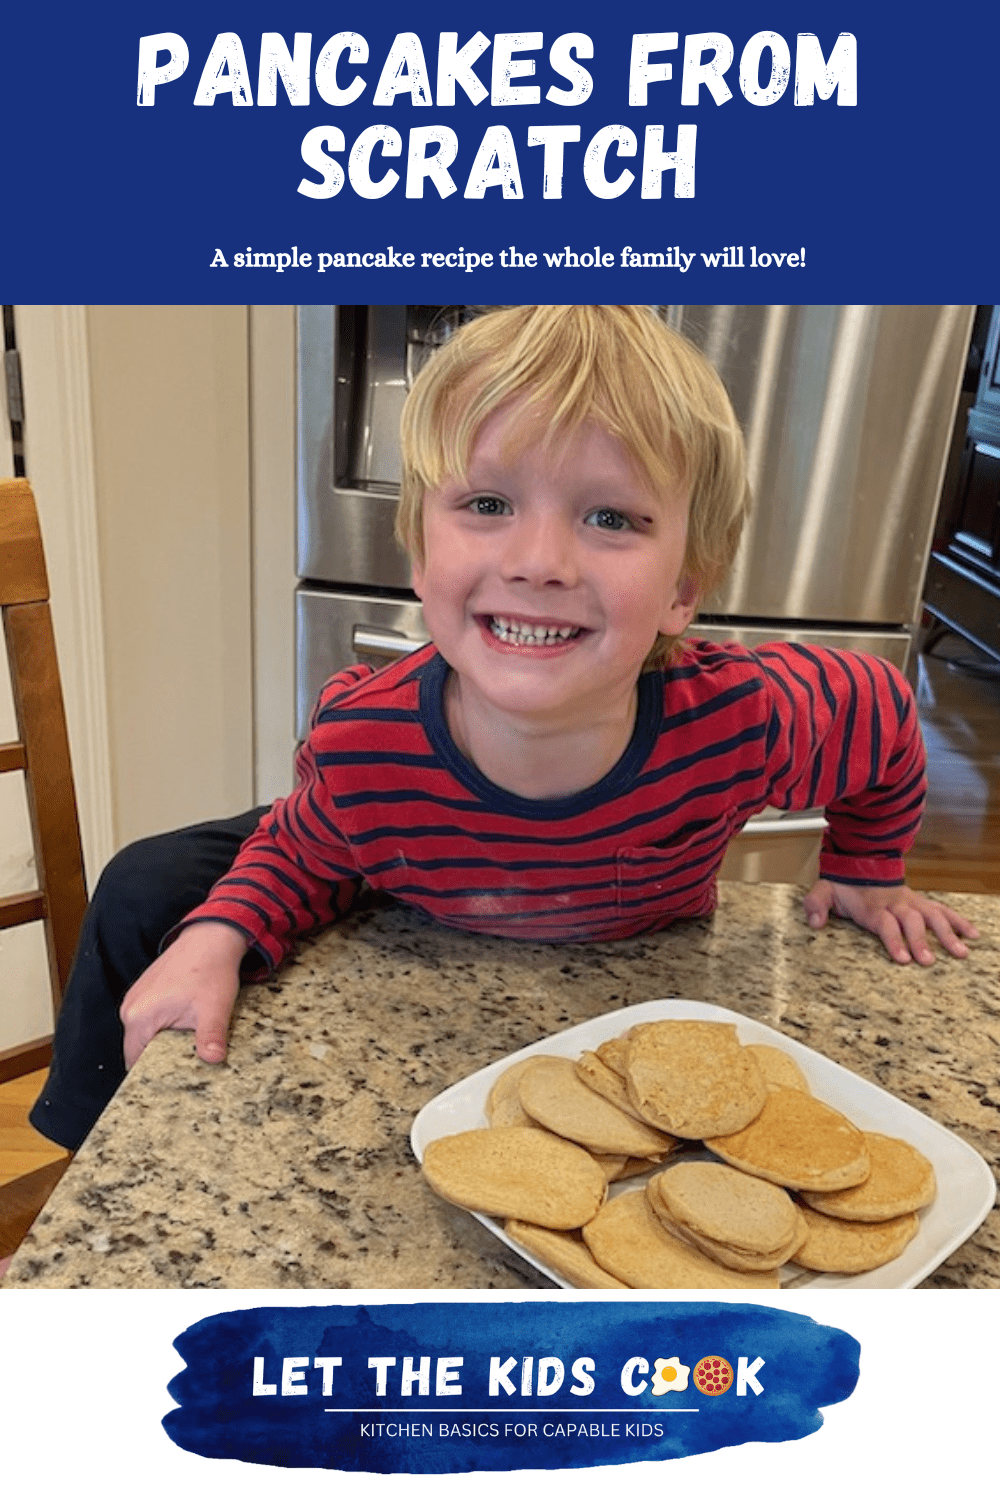 Learn how easy it is to make pancakes from scratch with this easy recipe. They're kid-friendly and freeze well. You can even mix the dry ingredients in advance to save time!